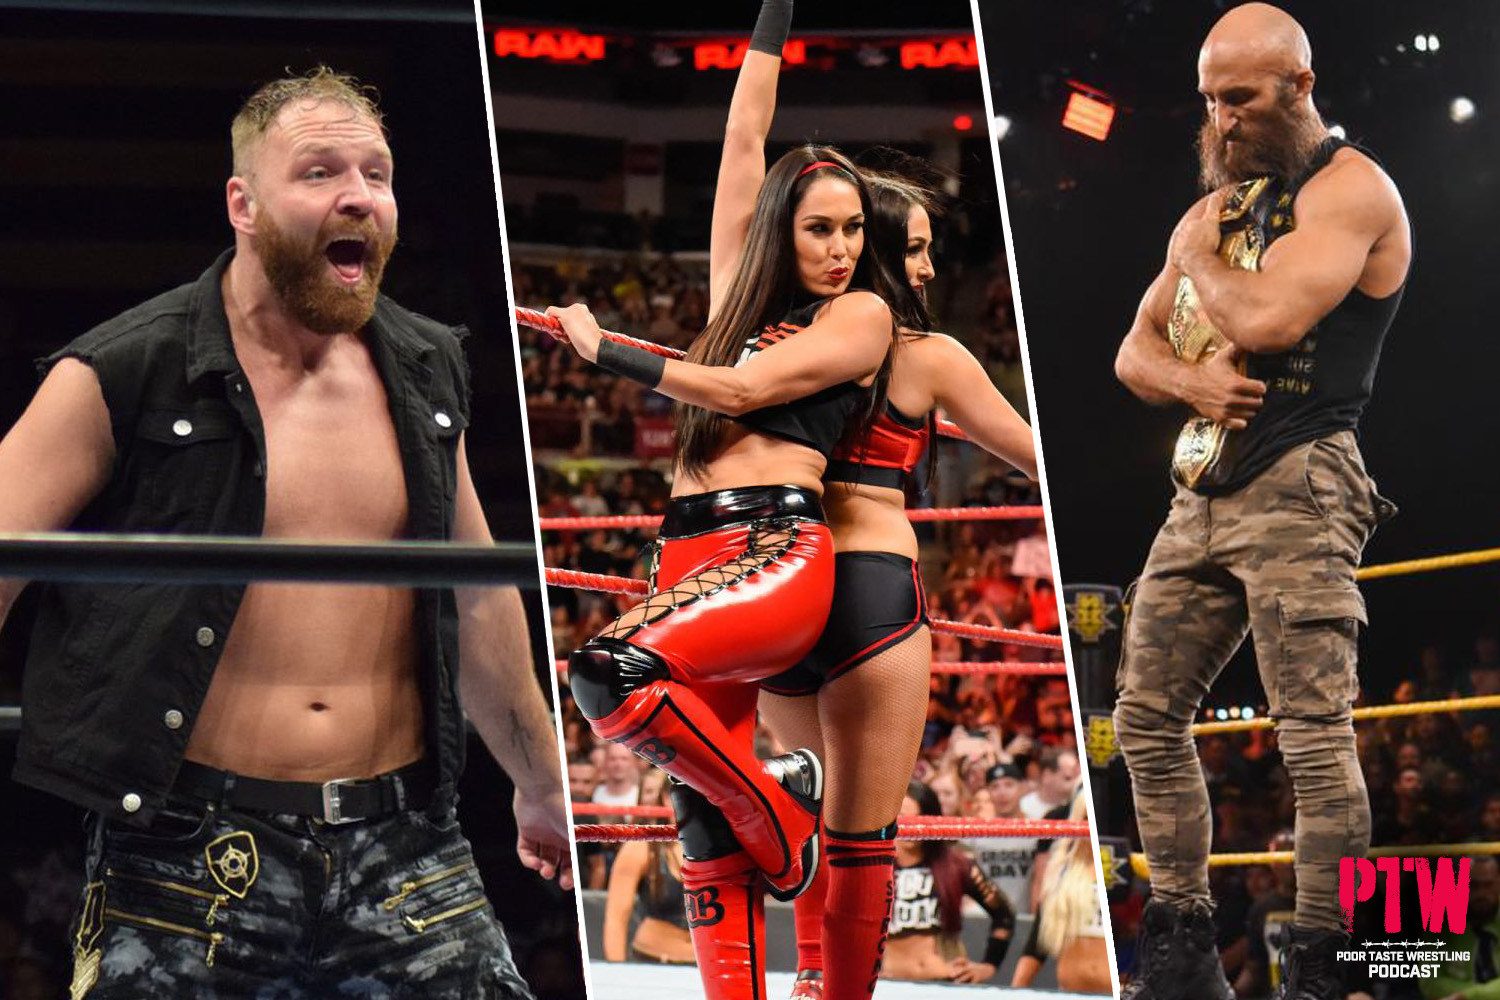 Poor Taste Wrestling podcast episode 91: You Can Look, But You Can't Touch